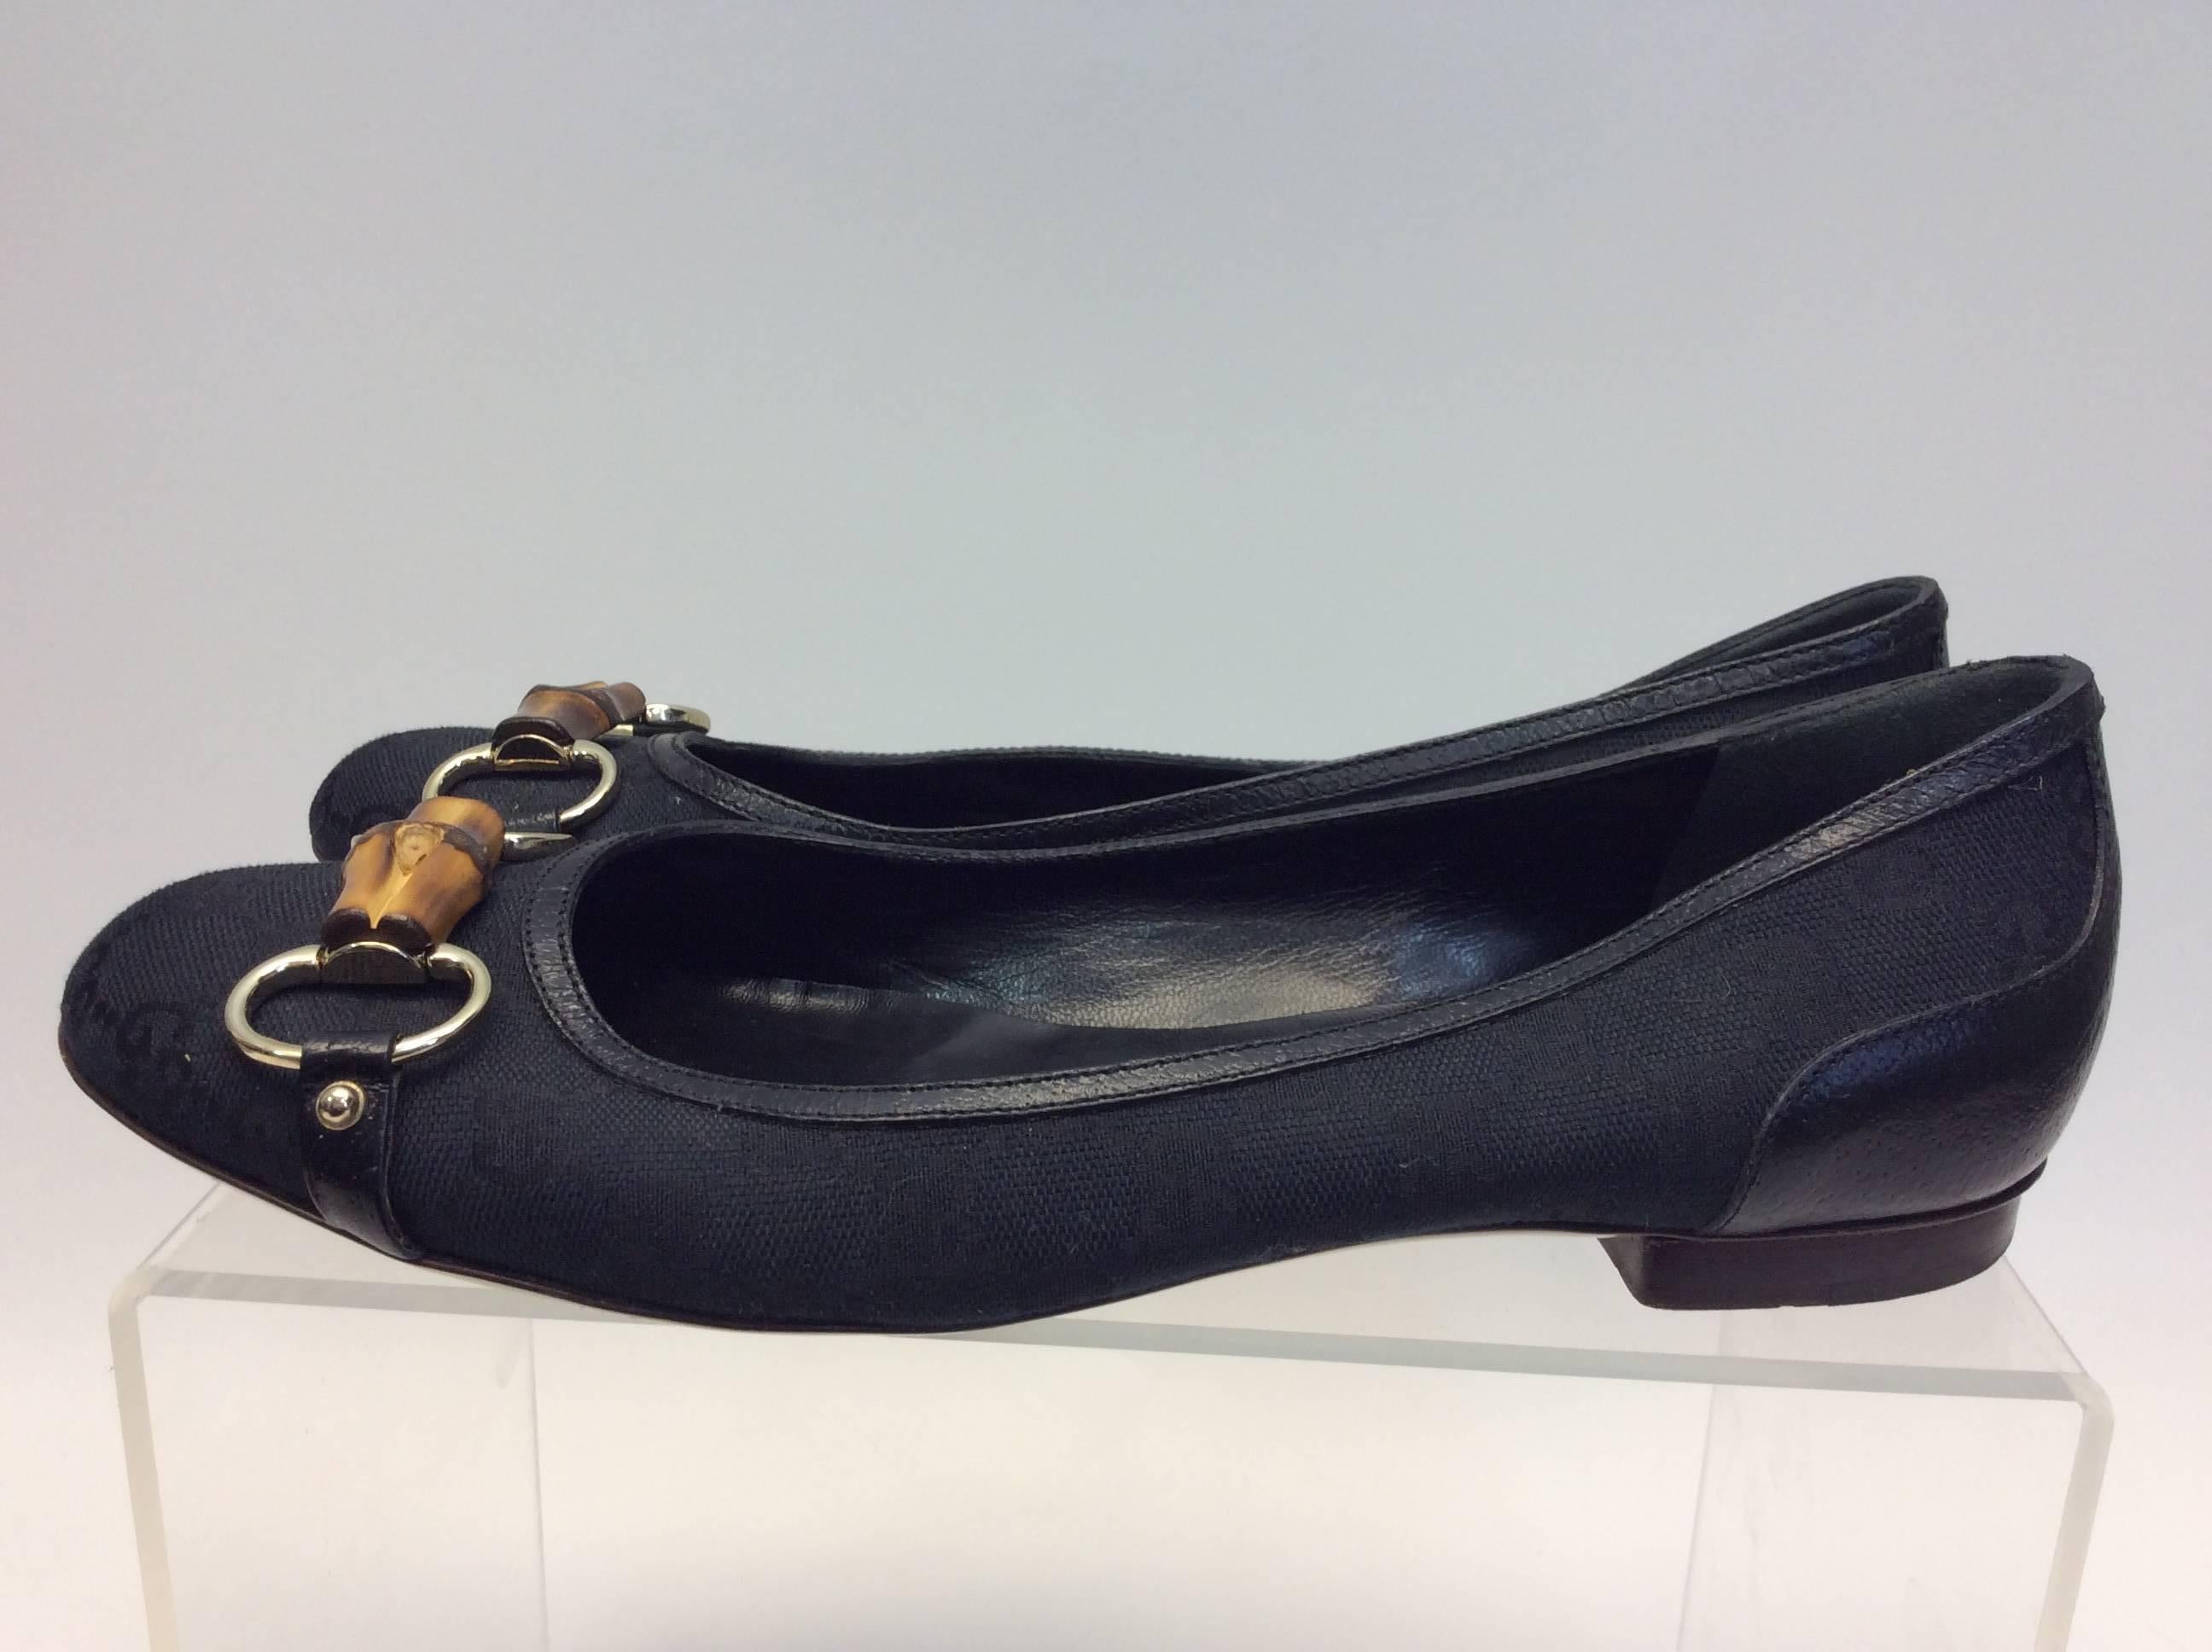 Gucci Black Flats
Size 9.5
Made in Italy
$150